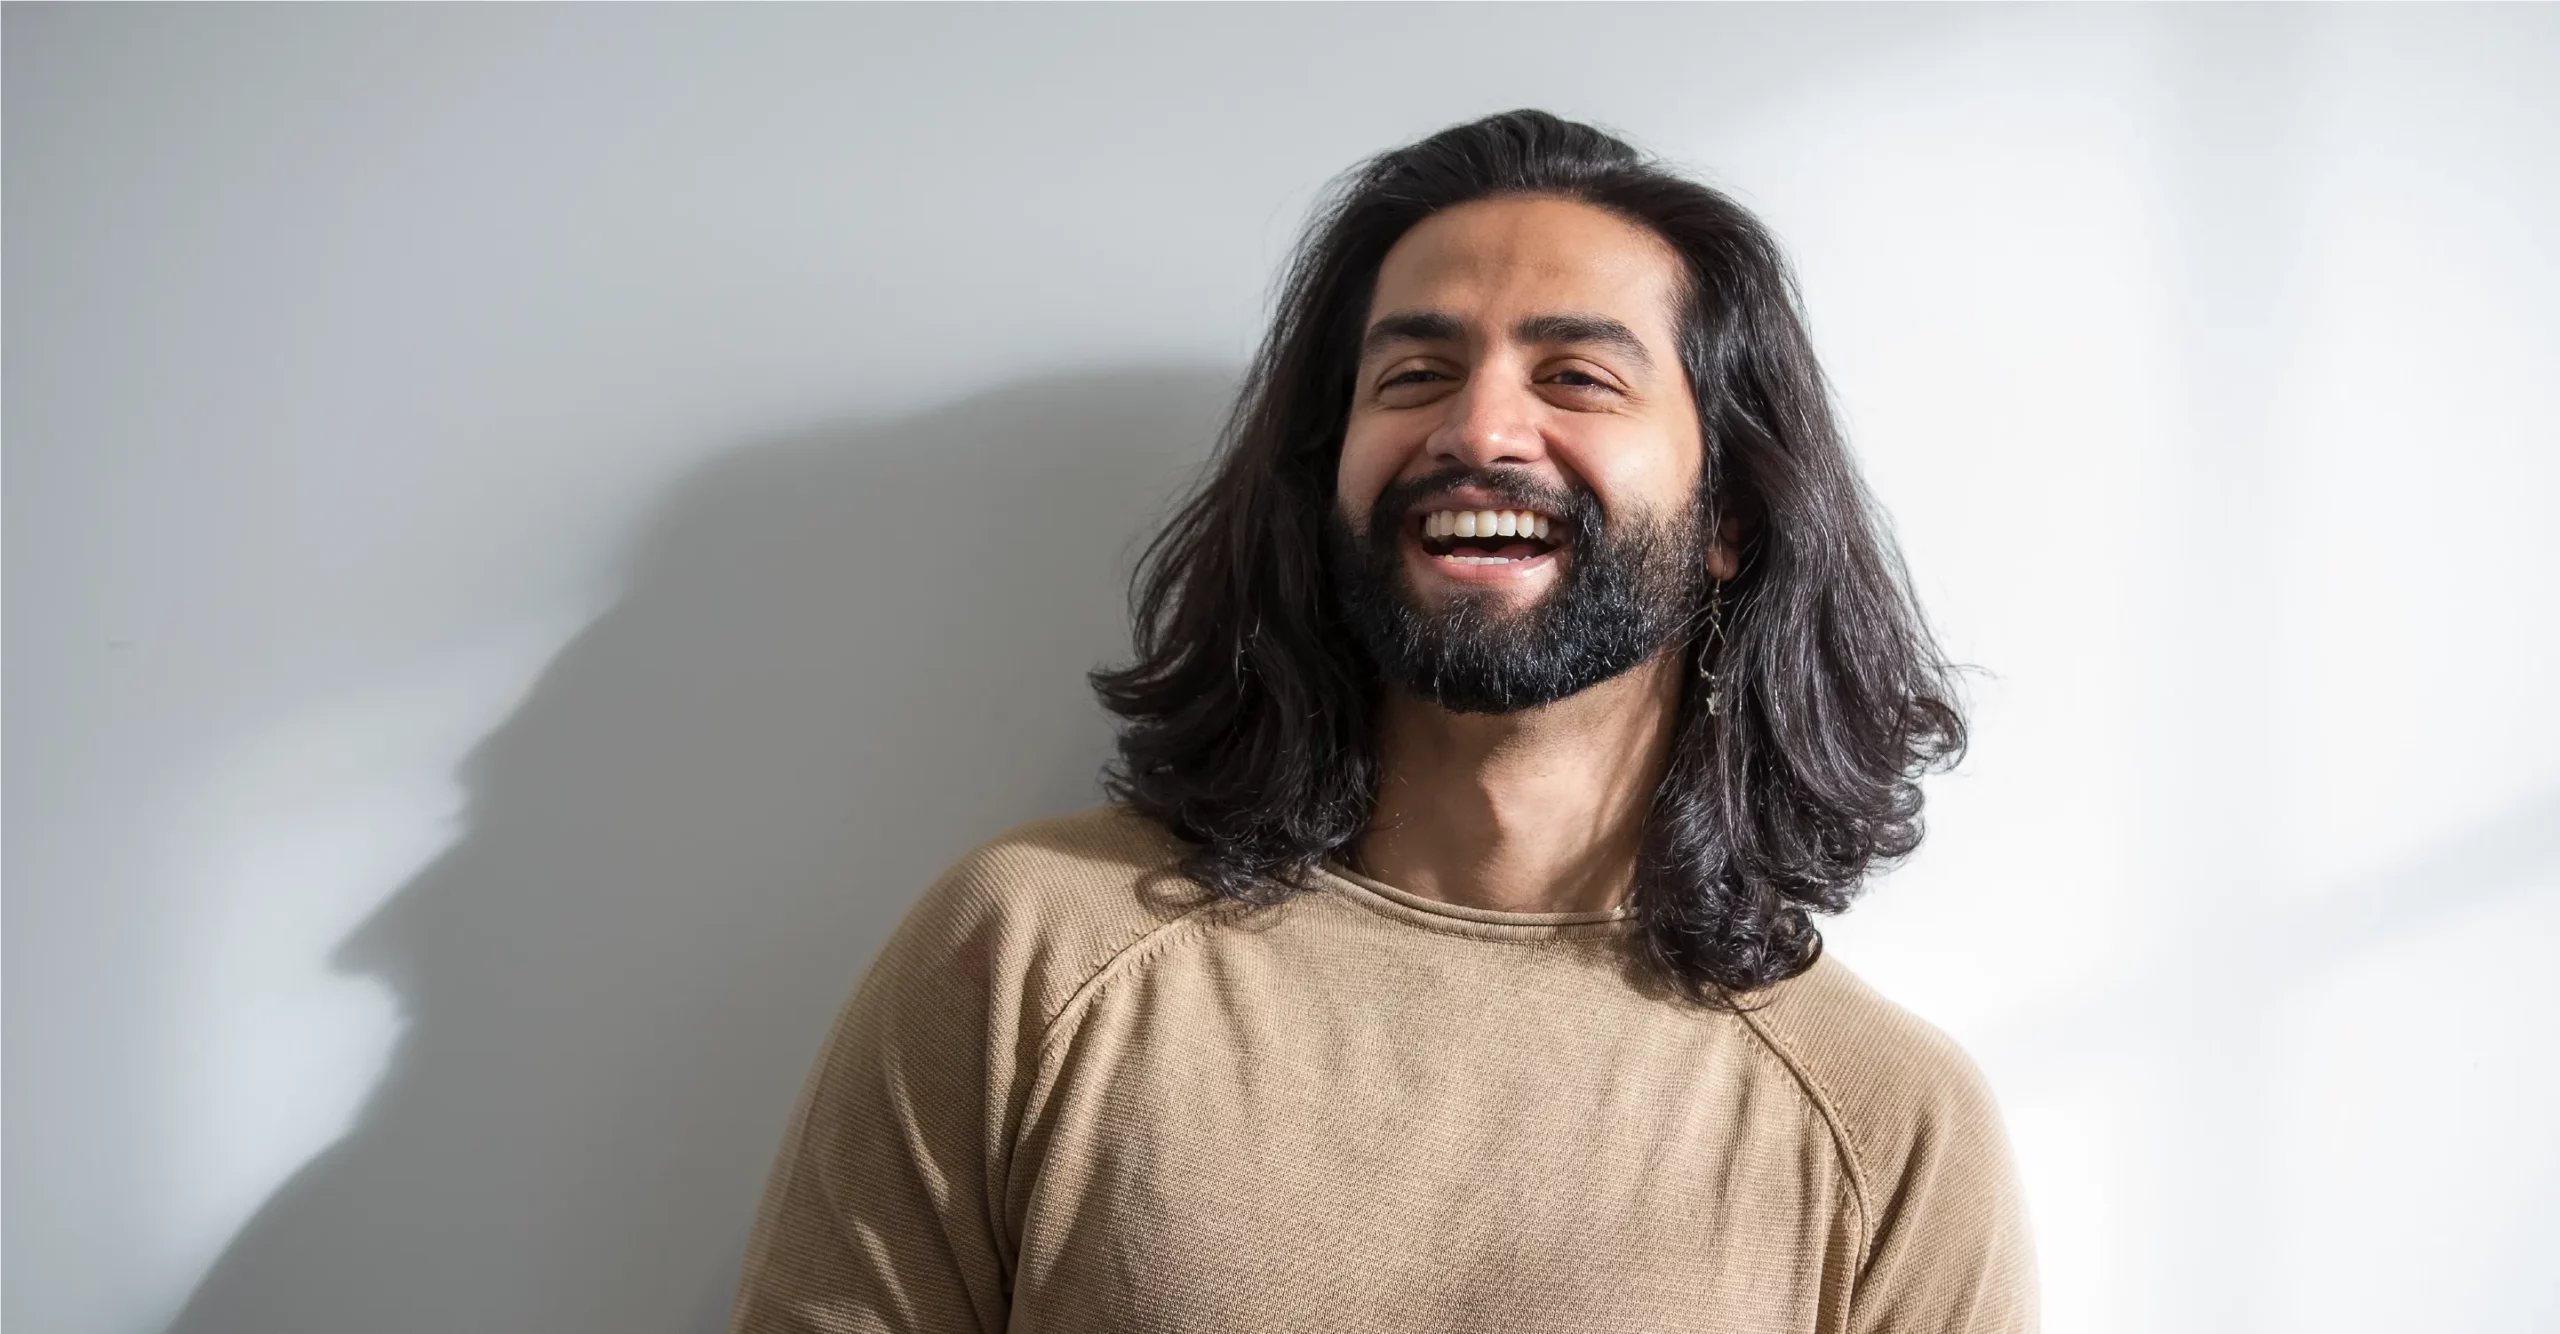 Man with longer grown out hair smiling.